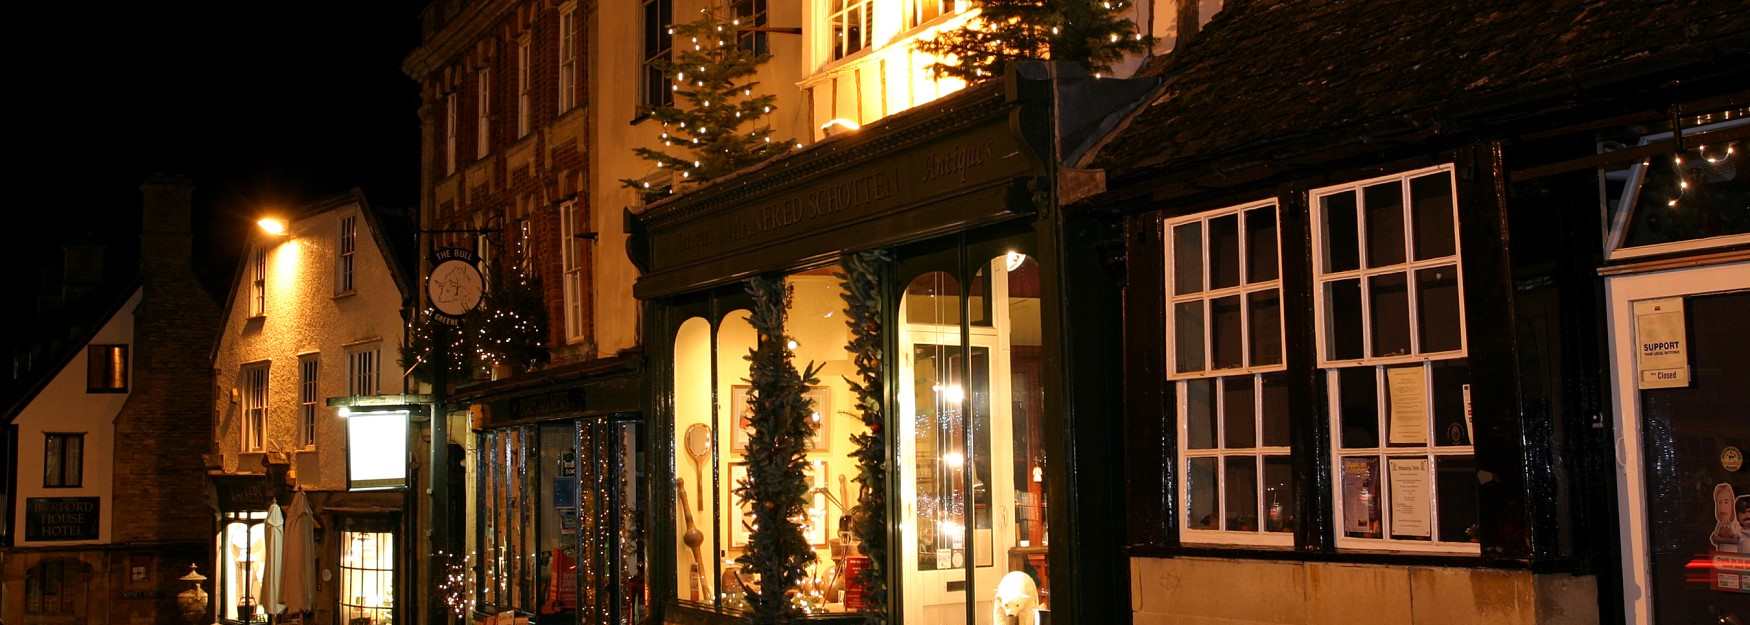 Burford shops decorated for Christmas